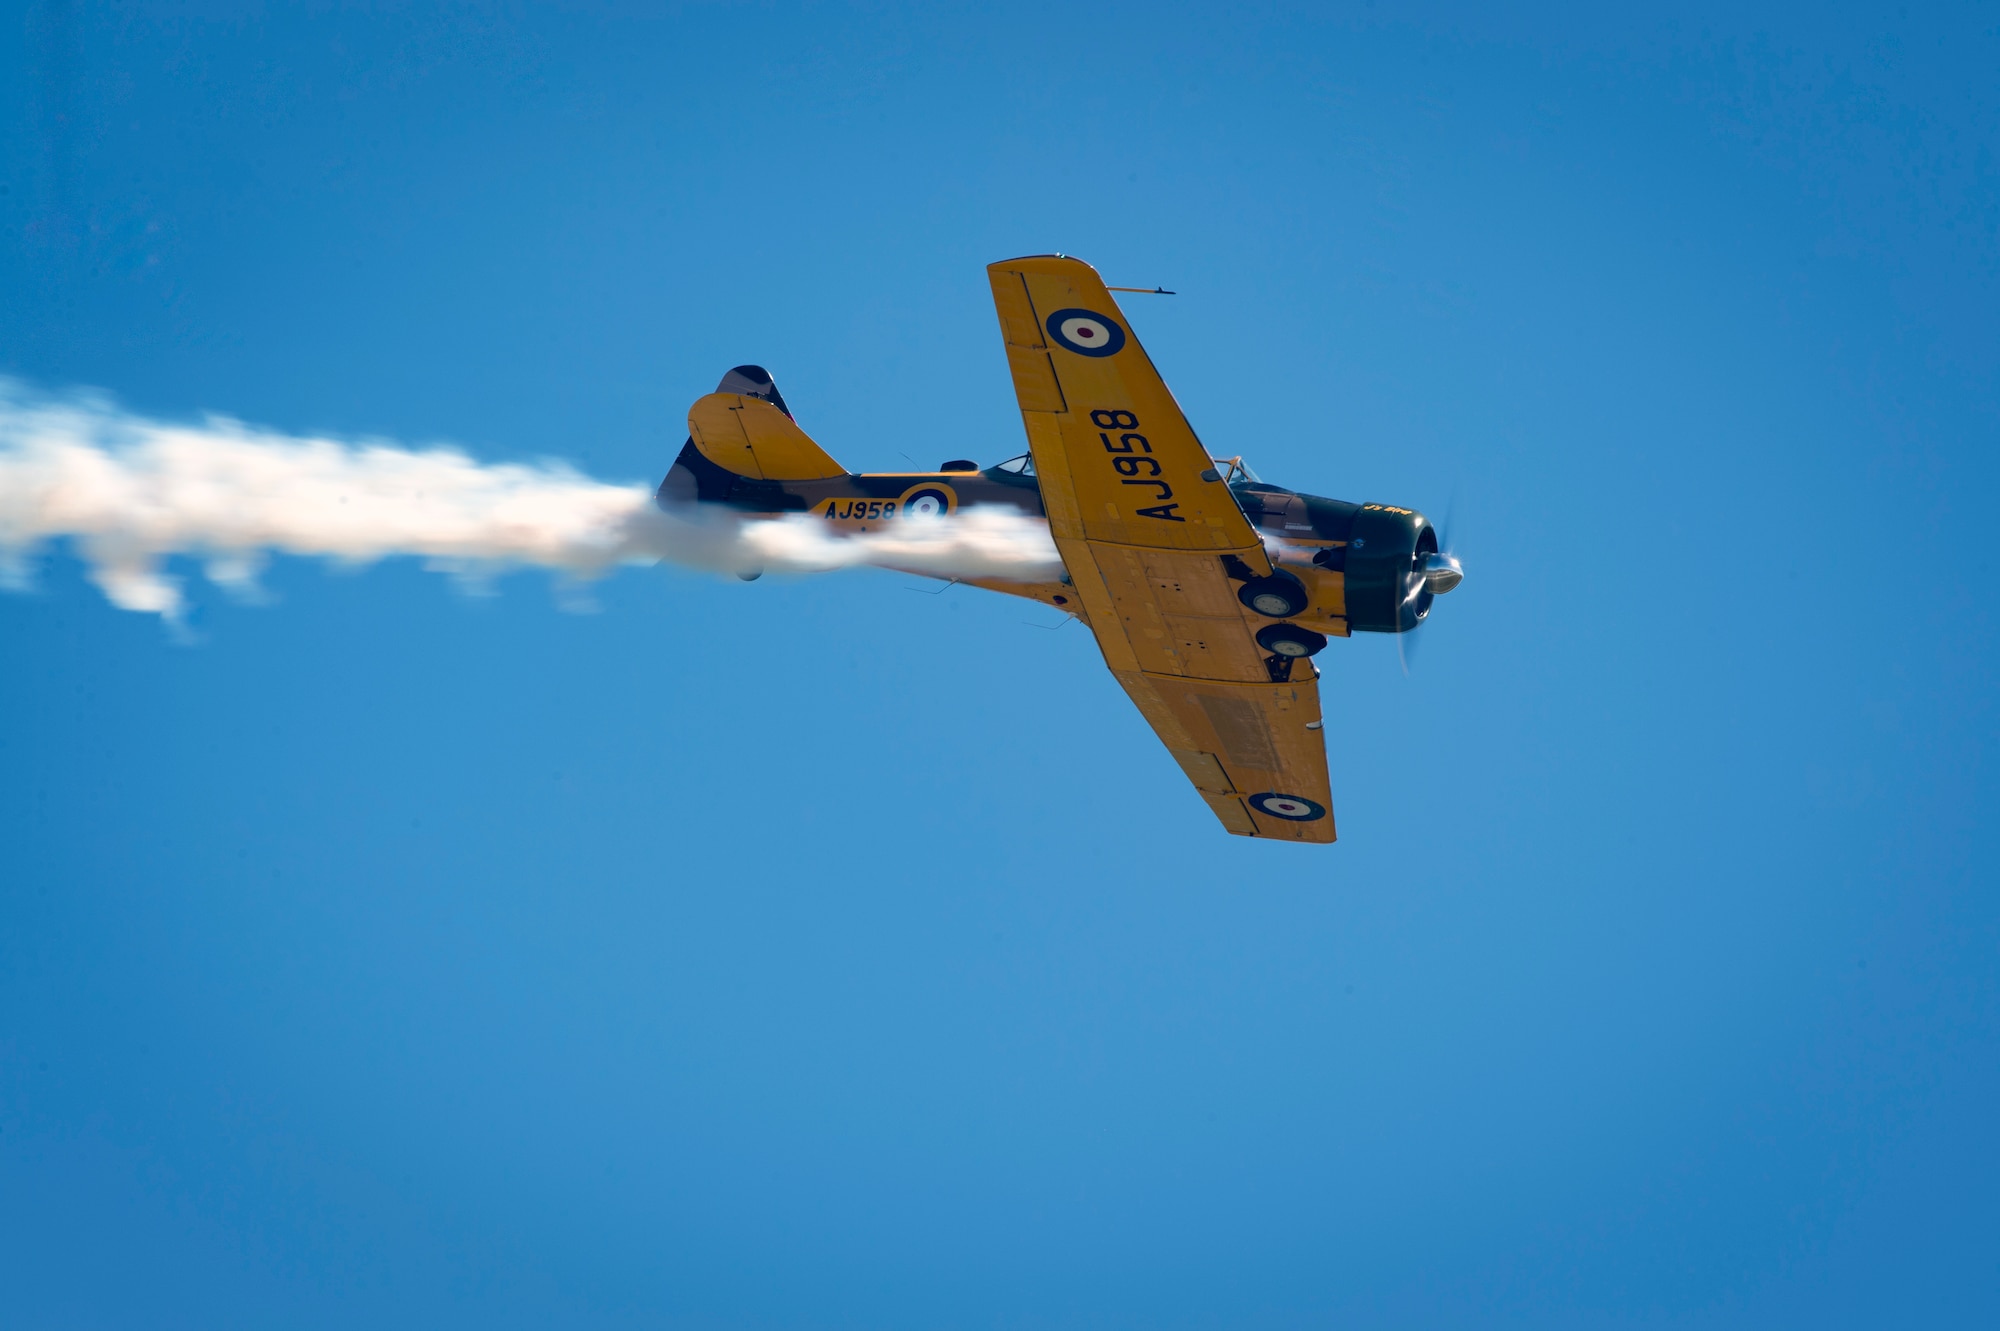 A T-6 Texan performs an aerobatic demonstration during the 2017 Thunder Over South Georgia Air Show, Oct. 28, 2017, at Moody Air Force Base, Ga. The air show is an opportunity for Moody to thank the local community for all its support, and exhibit air power. (U.S. Air Force photo by Senior Airman Greg Nash)